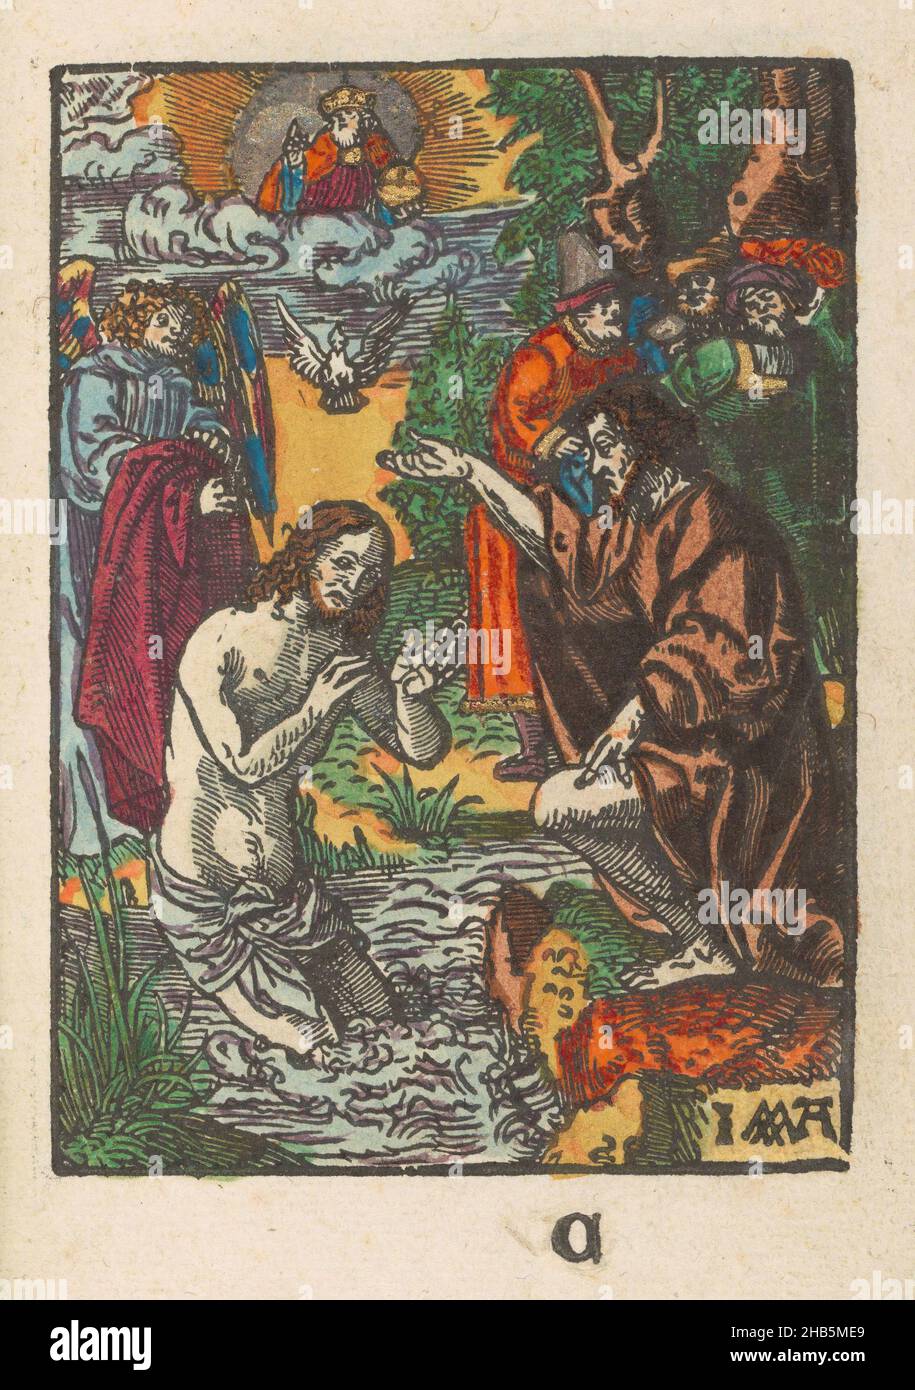 Baptism of Christ, The Little Passion (series title), Mute Passion (series title), Christ is baptized by John the Baptist in the Jordan River. In the sky God the Father and the dove of the Holy Spirit appear. On the left, an angel holding the robe of Christ. Marked at the bottom: C. Print is part of a book., print maker: Jacob Cornelisz van Oostsanen (mentioned on object), publisher: Doen Pietersz., Amsterdam,  1520 - 1521 and/or c. 1530, paper, height 111 mm × width 79 mmheight 159 mm × width 101 mm Stock Photo